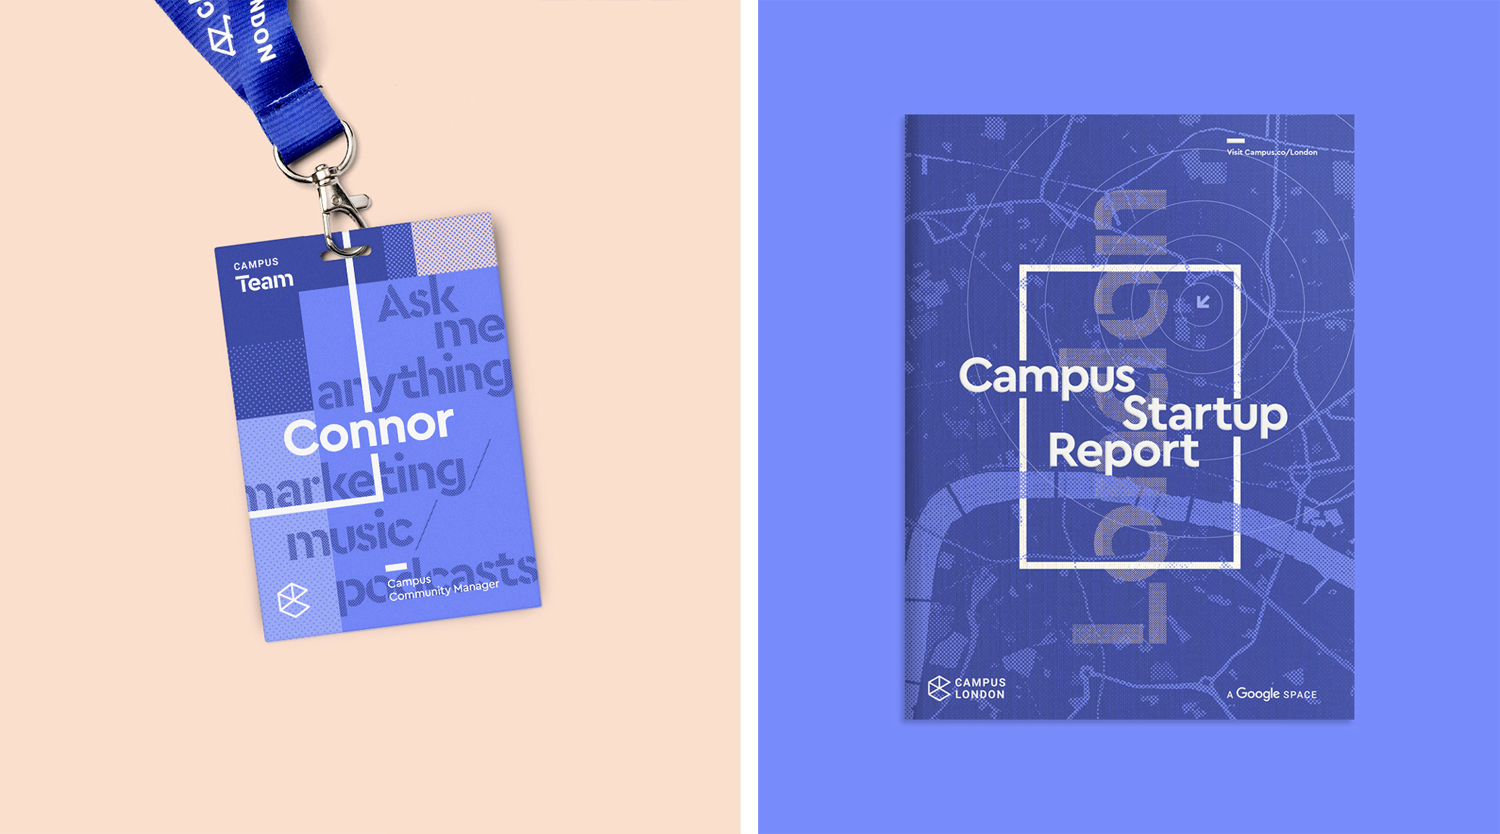 Logo, visual identity, brochure and website by MultiAdaptor for Google's co-working and event space concept Campus